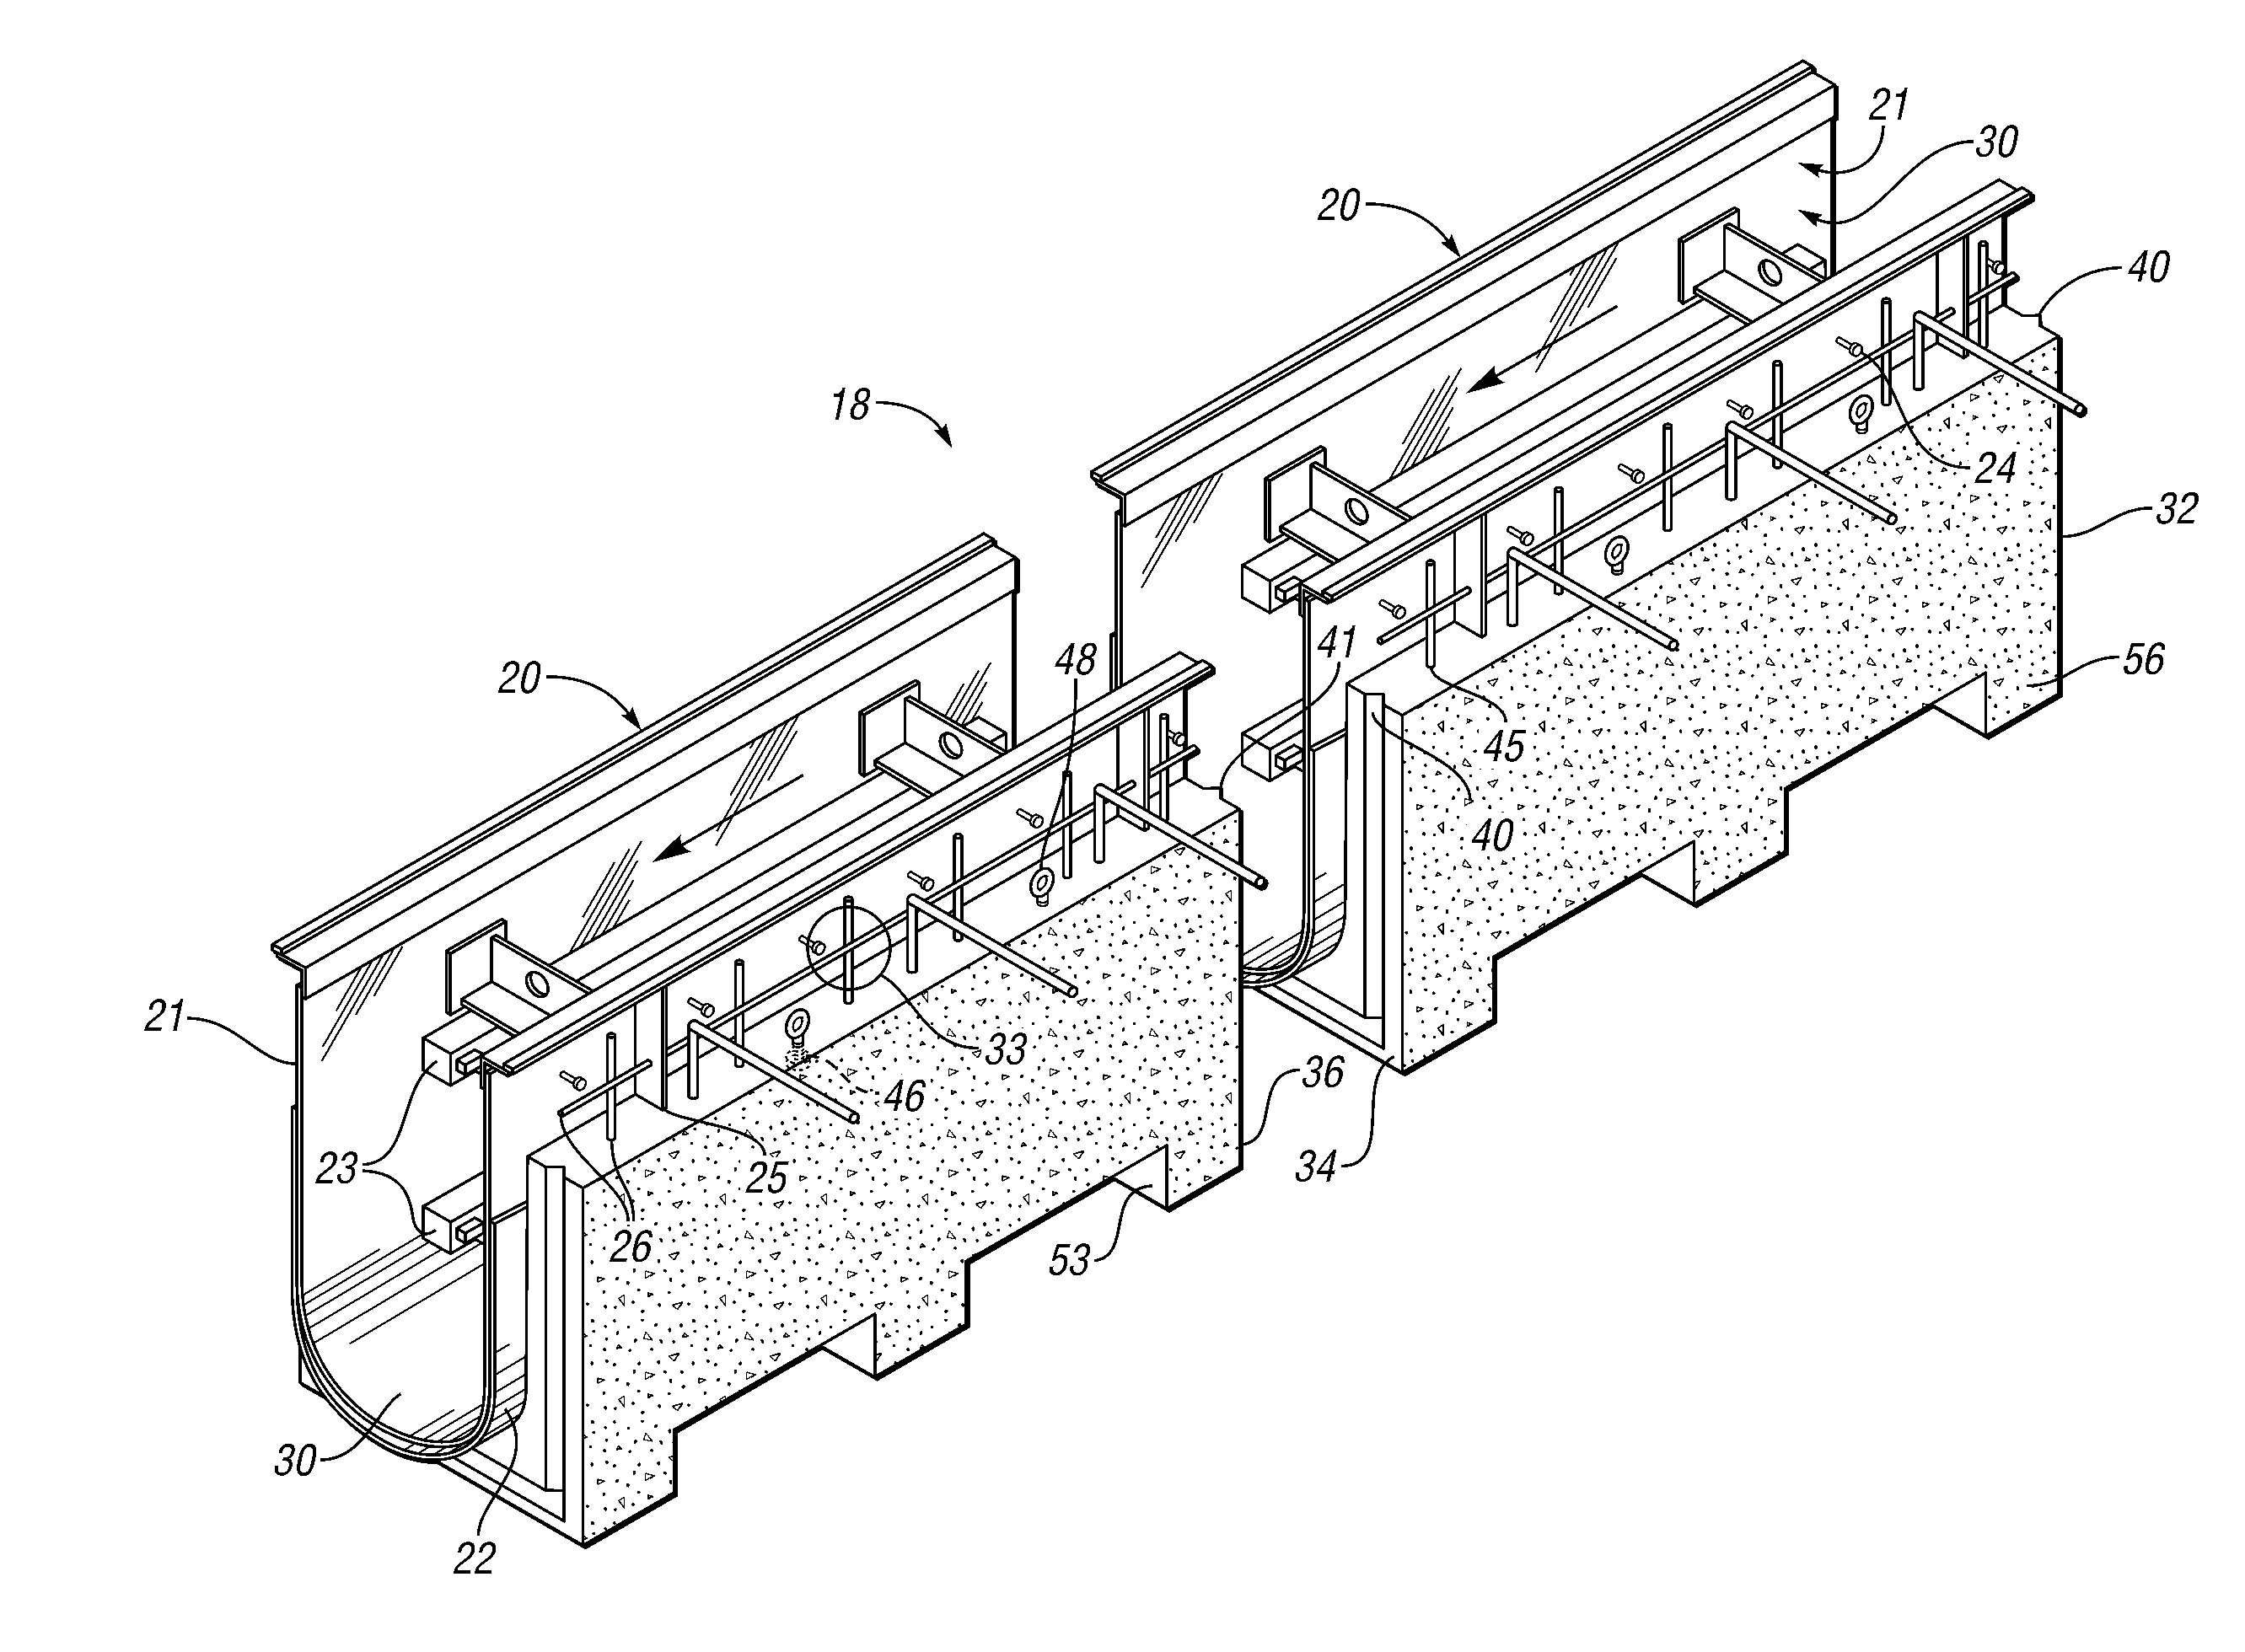 Precasting of fabricated flumes for machining coolant systems